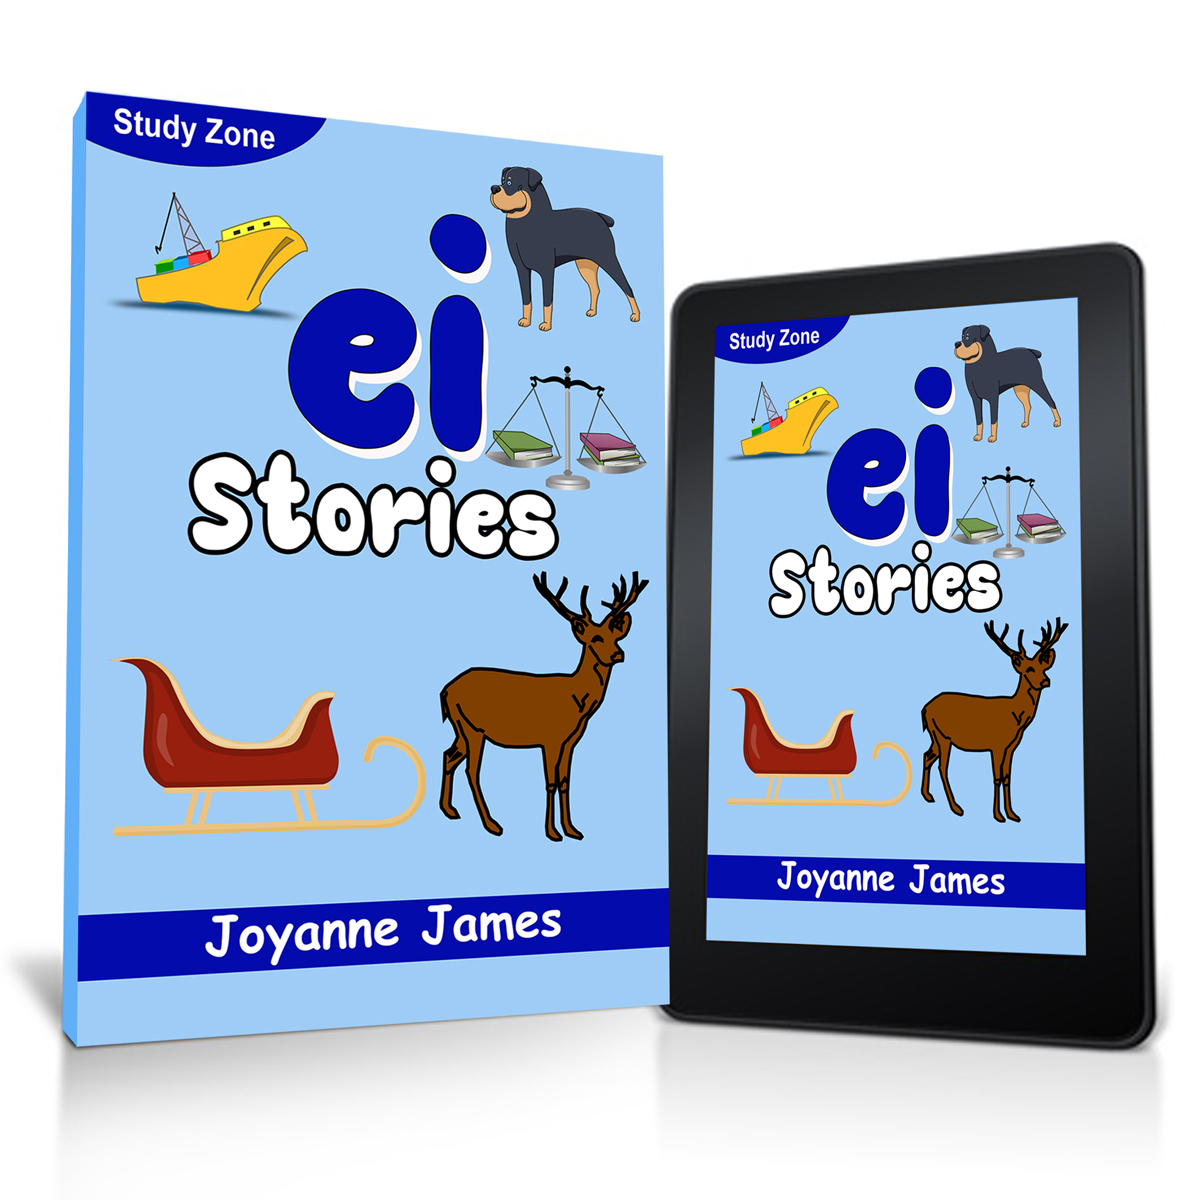 EI Stories. Improve Spelling and Reading Skills Publications.